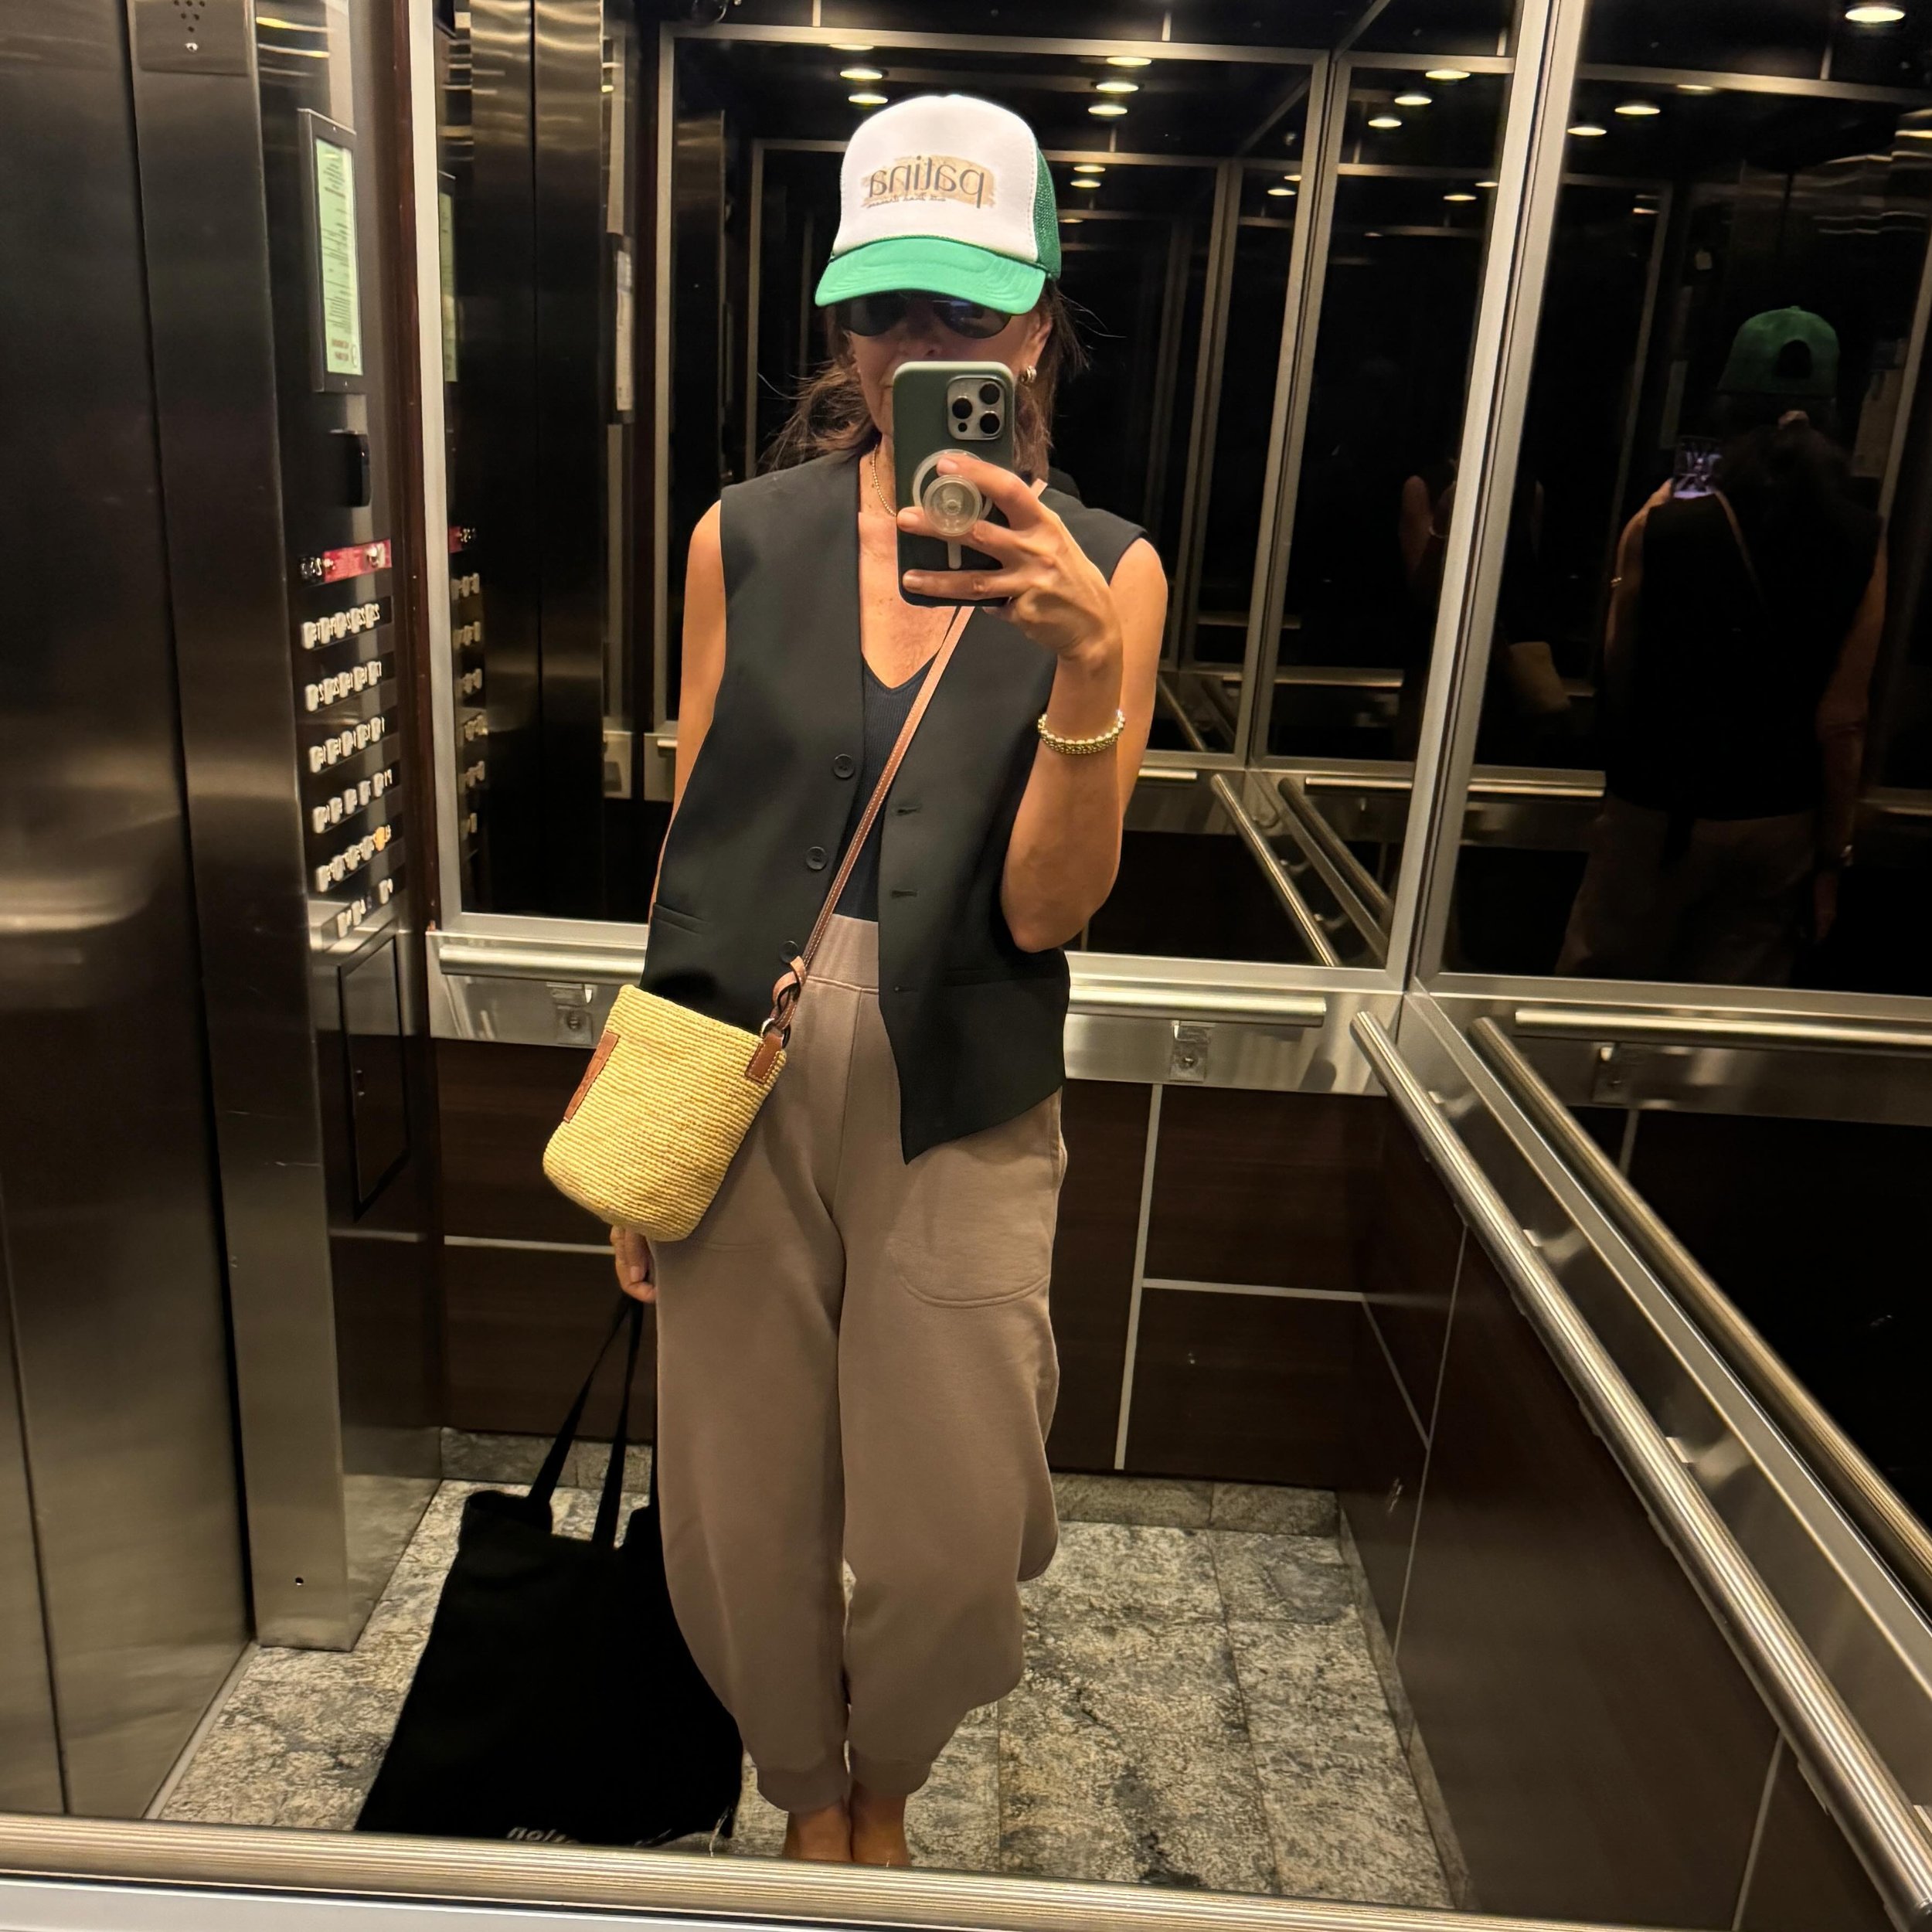 A vest with sweat pants and baseball cap? Yes please! Vests are always in rotation in my closet, and in this week&rsquo;s Substack newsletter I&rsquo;m featuring some cool styles along with lots of other fun stuff in a monthly installment I call Bits